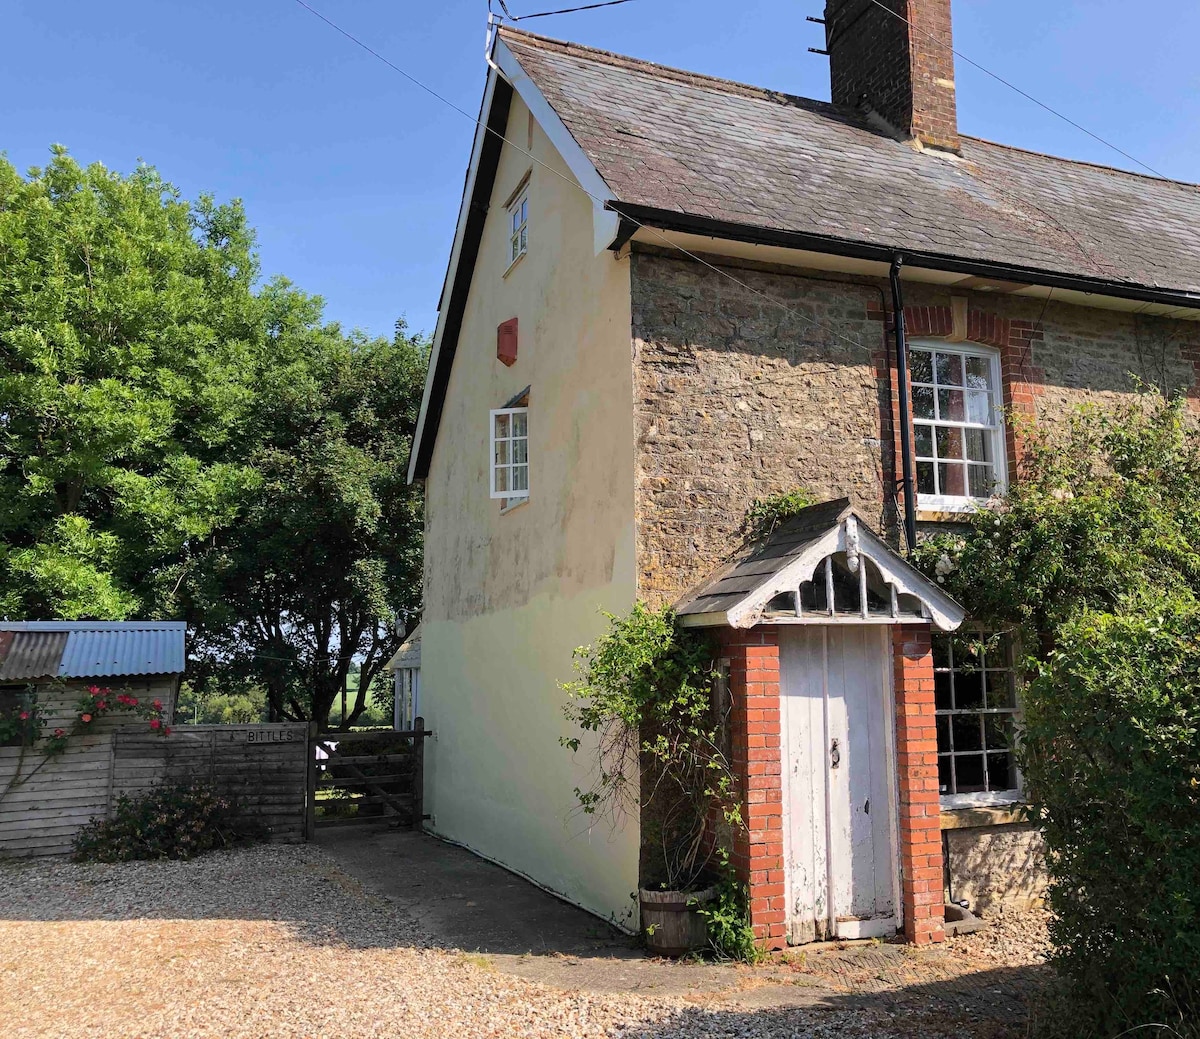 My Darling Charming Quirky Dorset Cottage